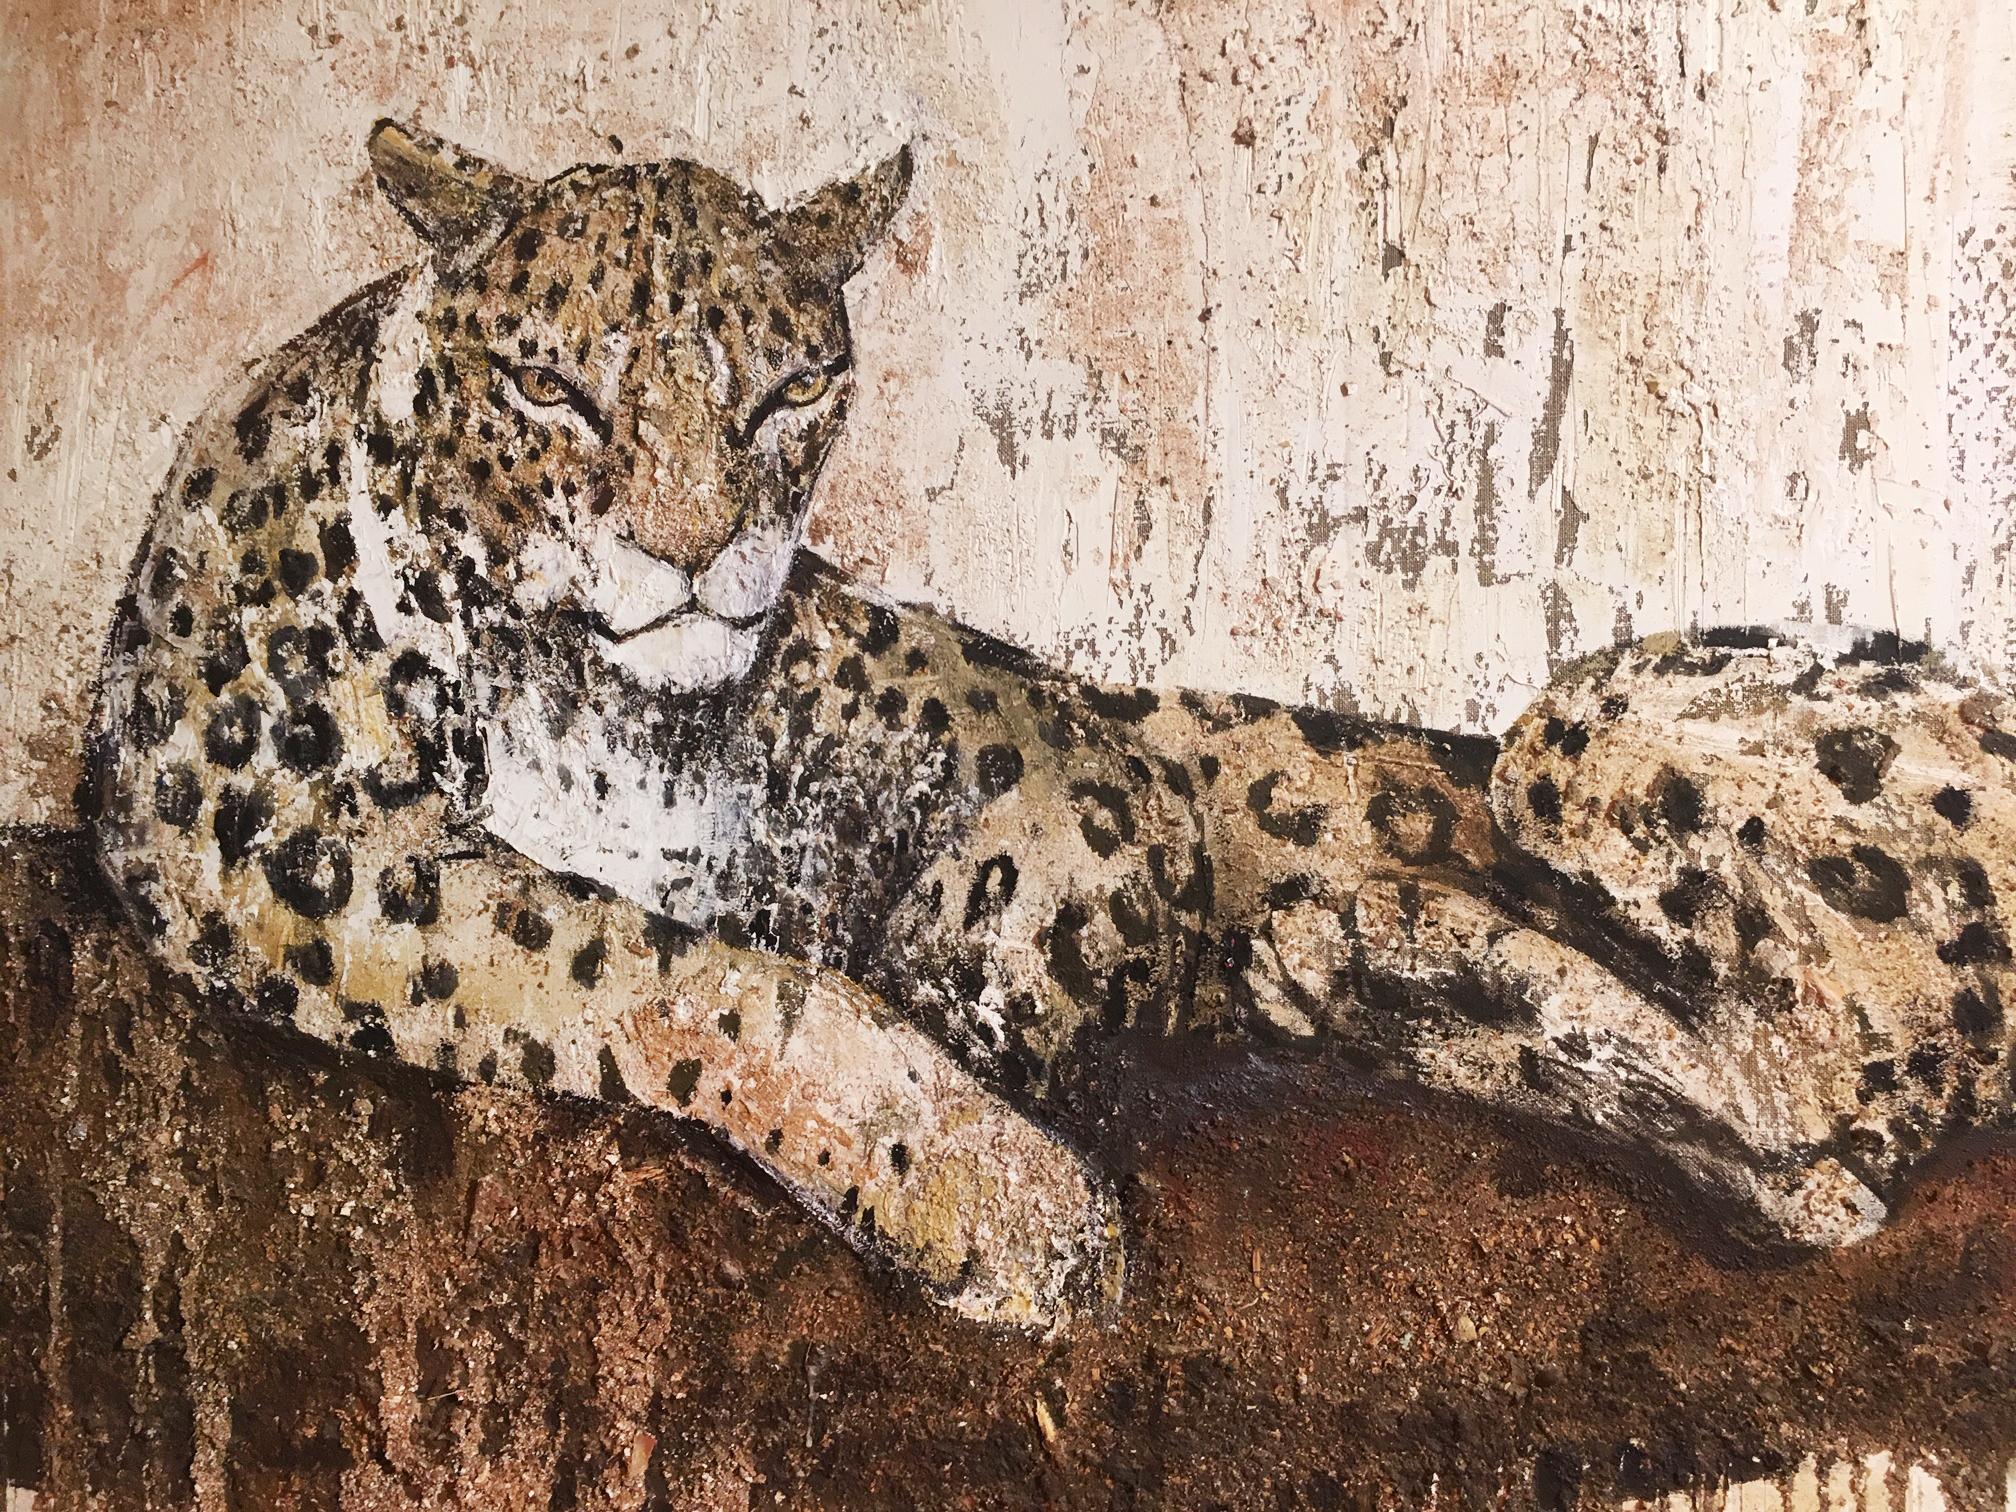 Painting of panther made on canvas,
painting made with marble dust and oil.
Mixte technical by painter Carole Ivoy.